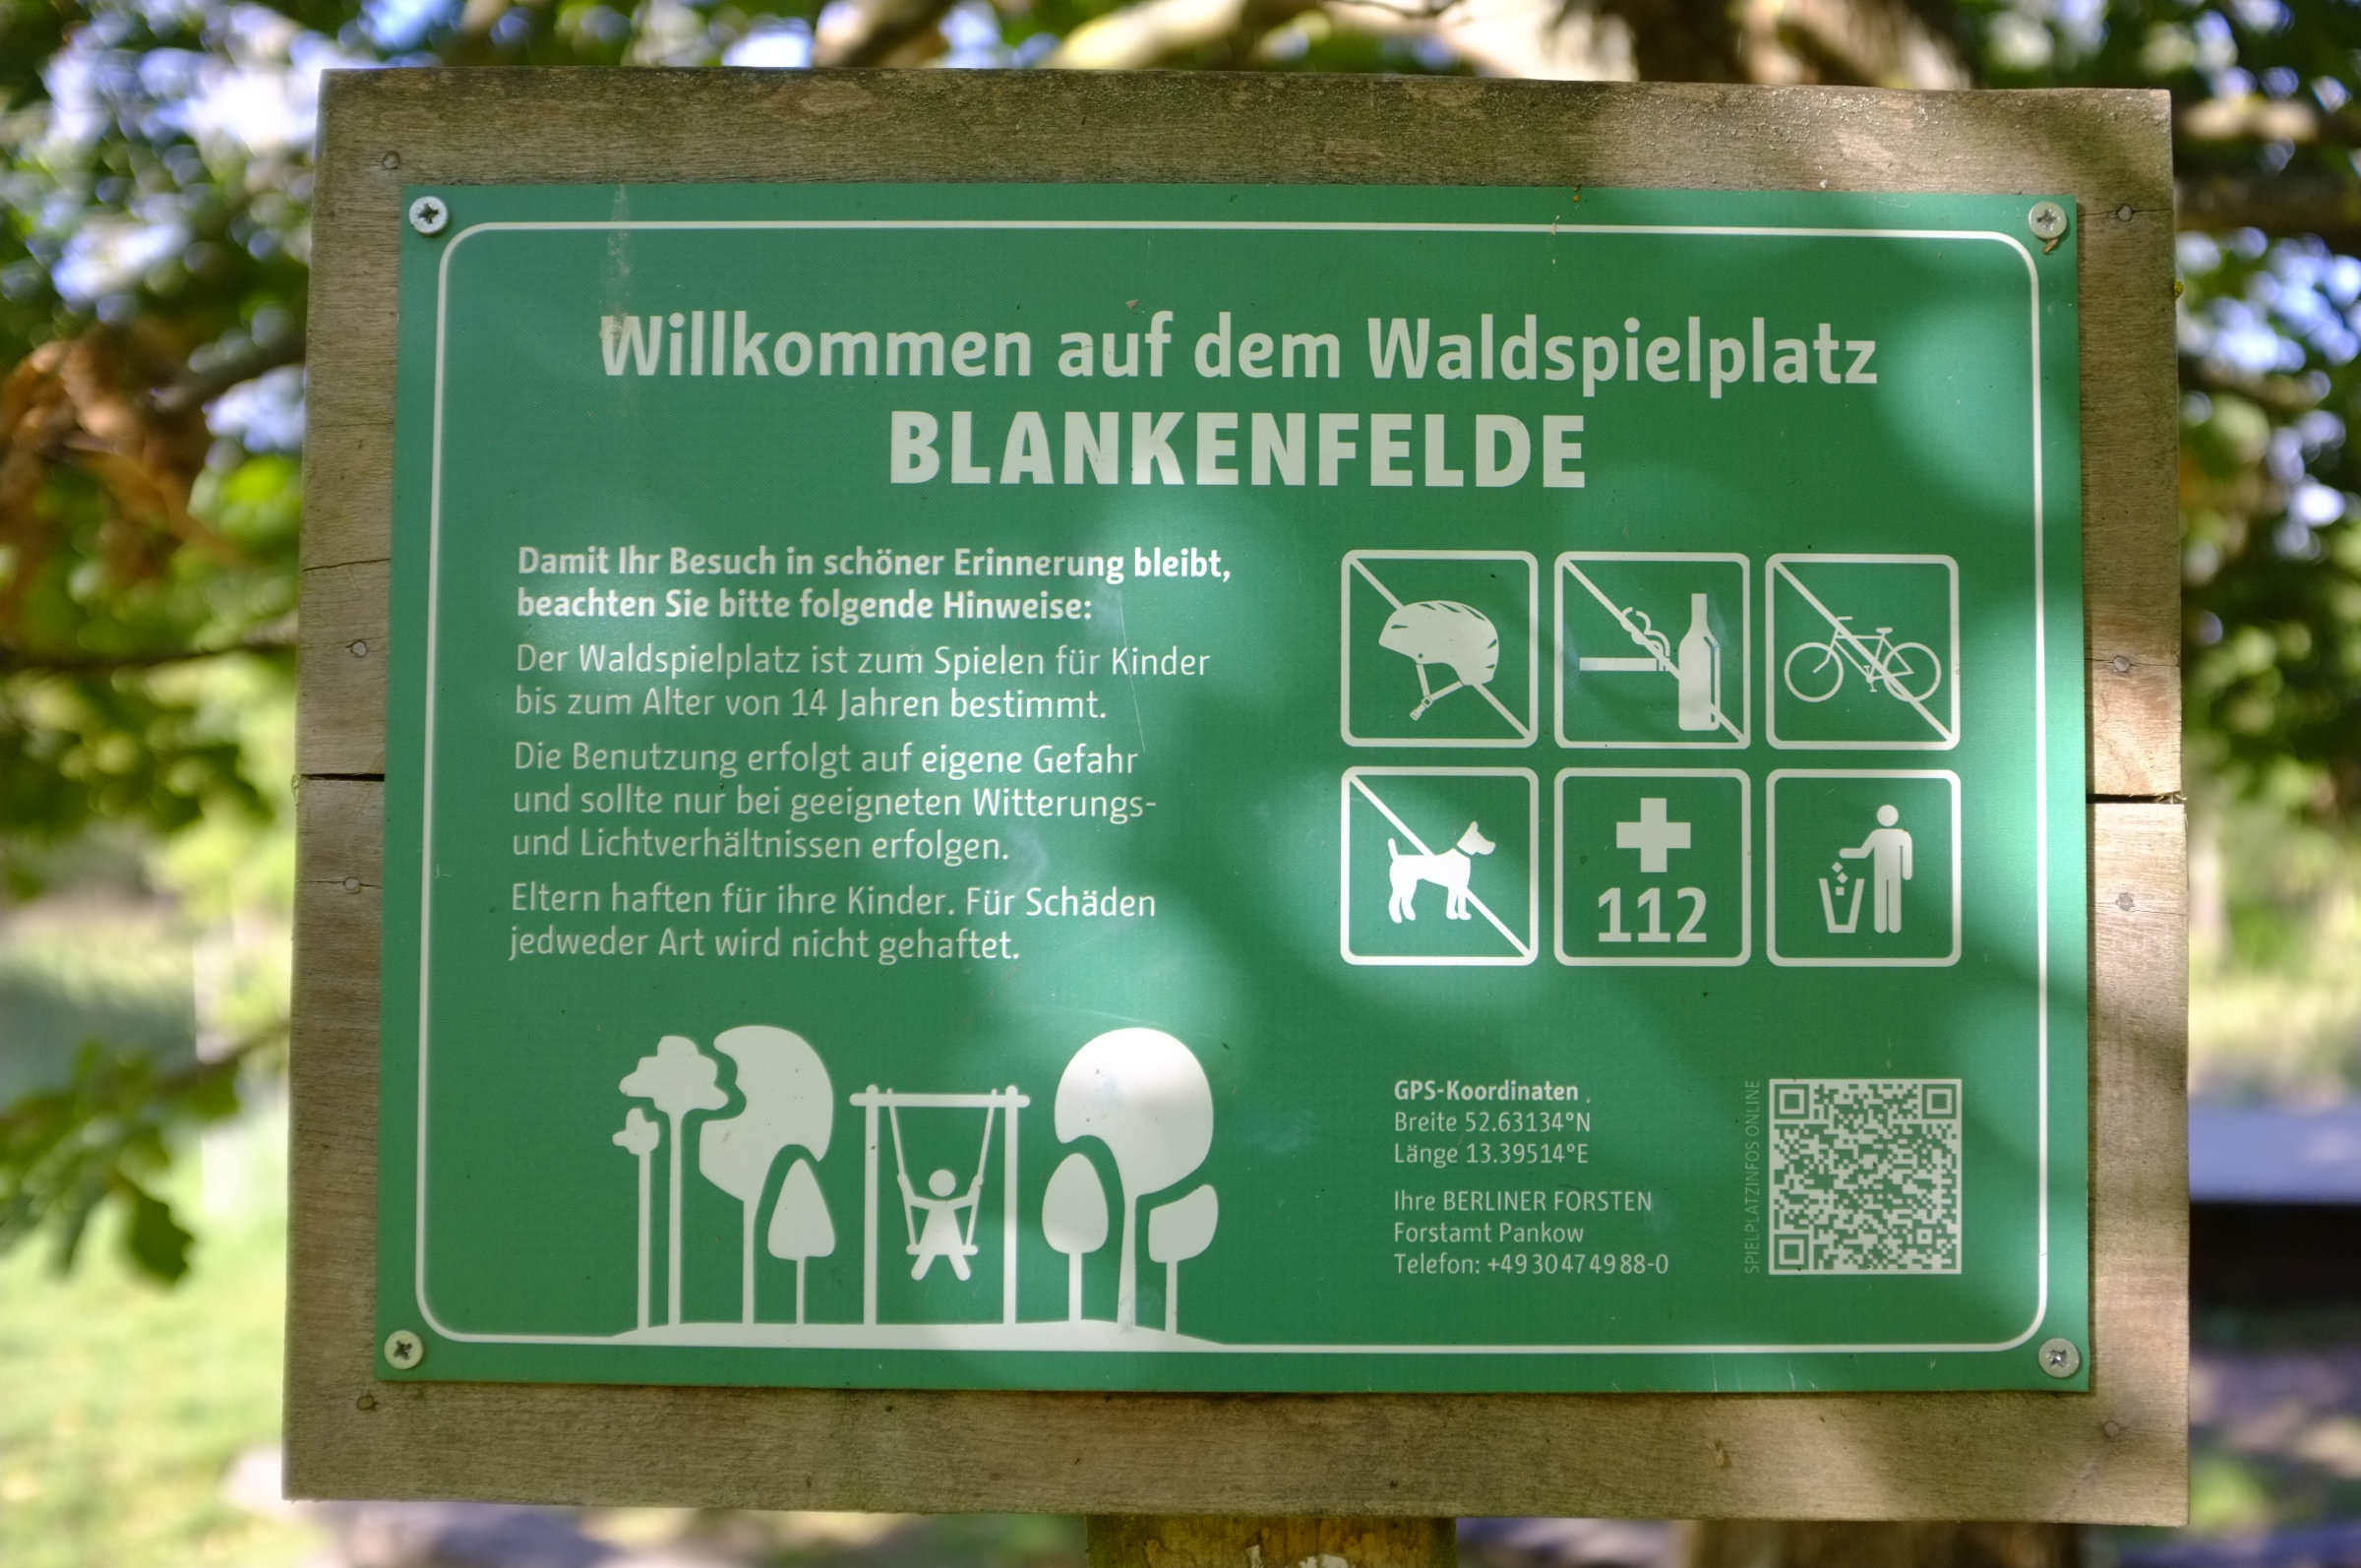 Change in use as Berlin’s corporate typeface – Information board forest playground Blankenfelde